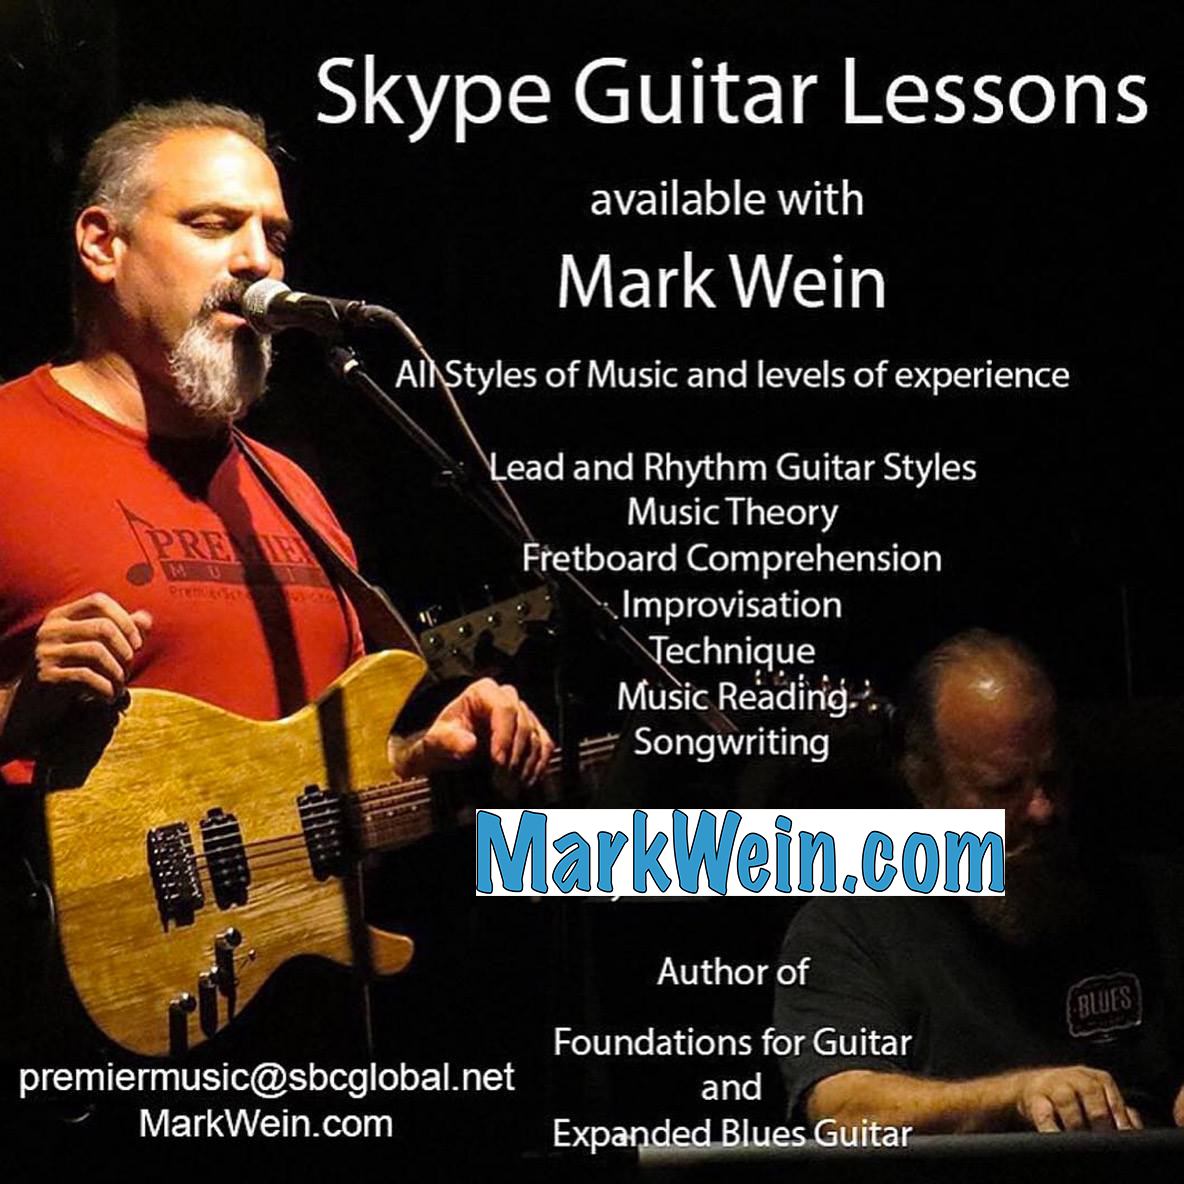 Skype Guitar Lessons Available!